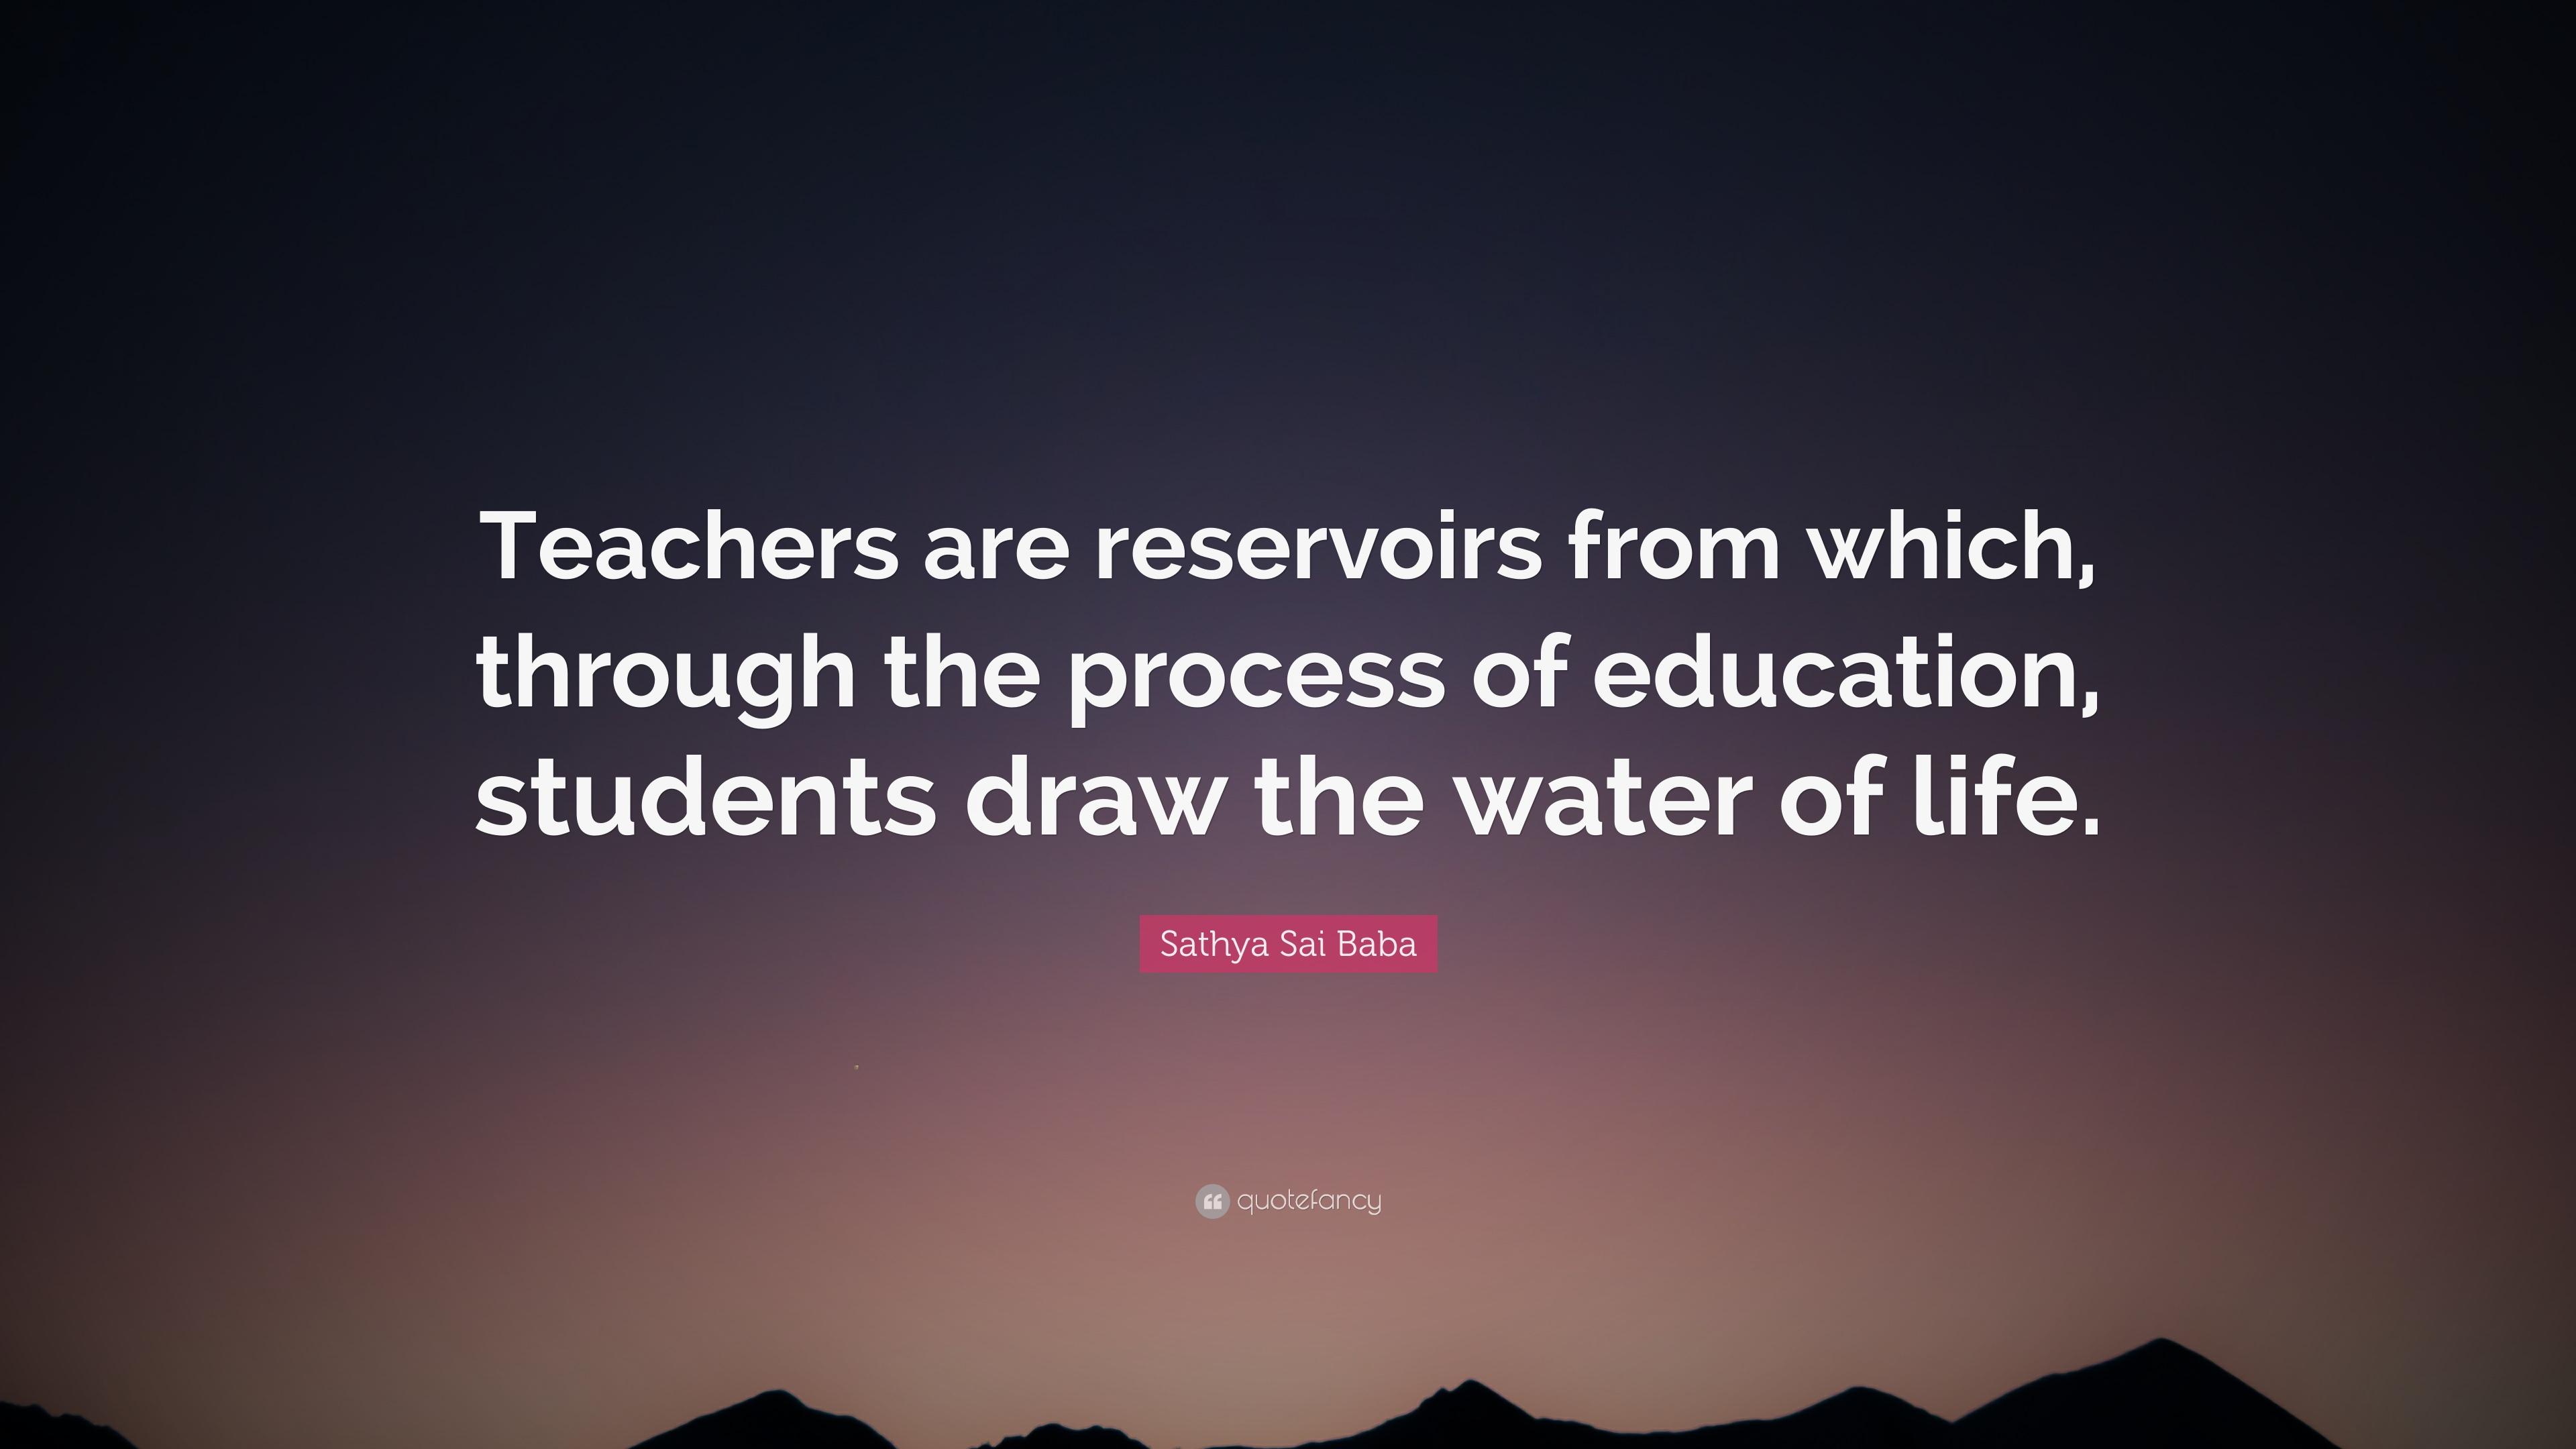 Sathya Sai Baba Quote: “Teachers are reservoirs from which, through